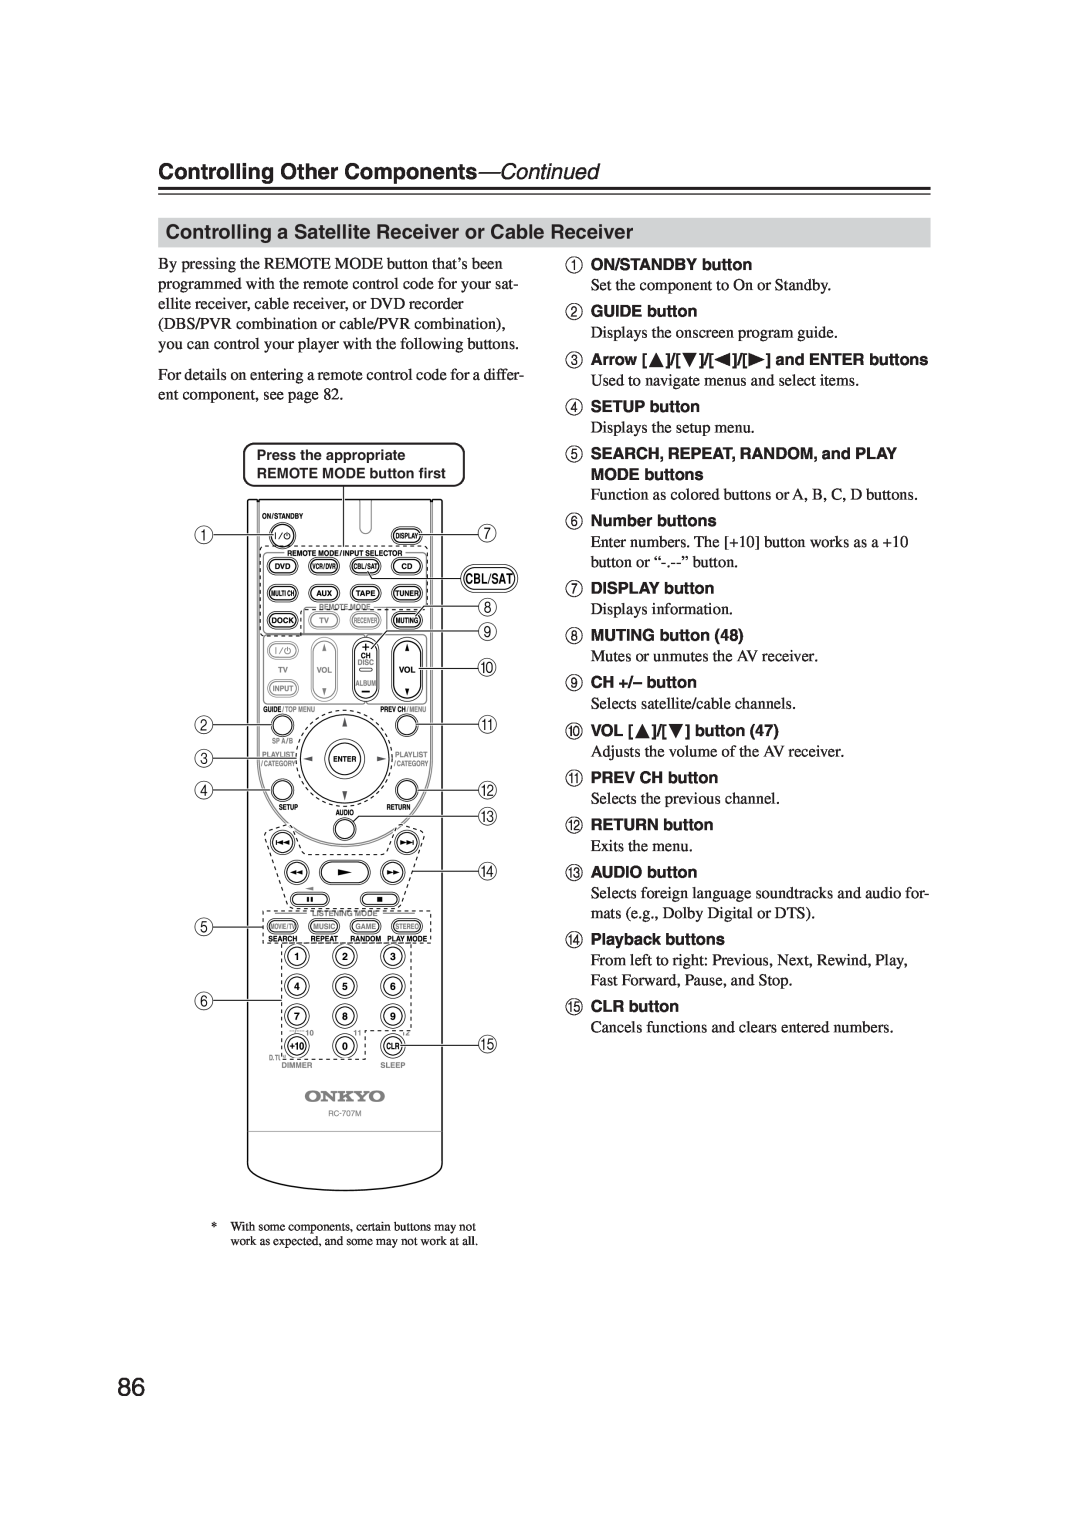 Onkyo S5100 instruction manual Controlling Other Components—Continued, AON/STANDBY button 